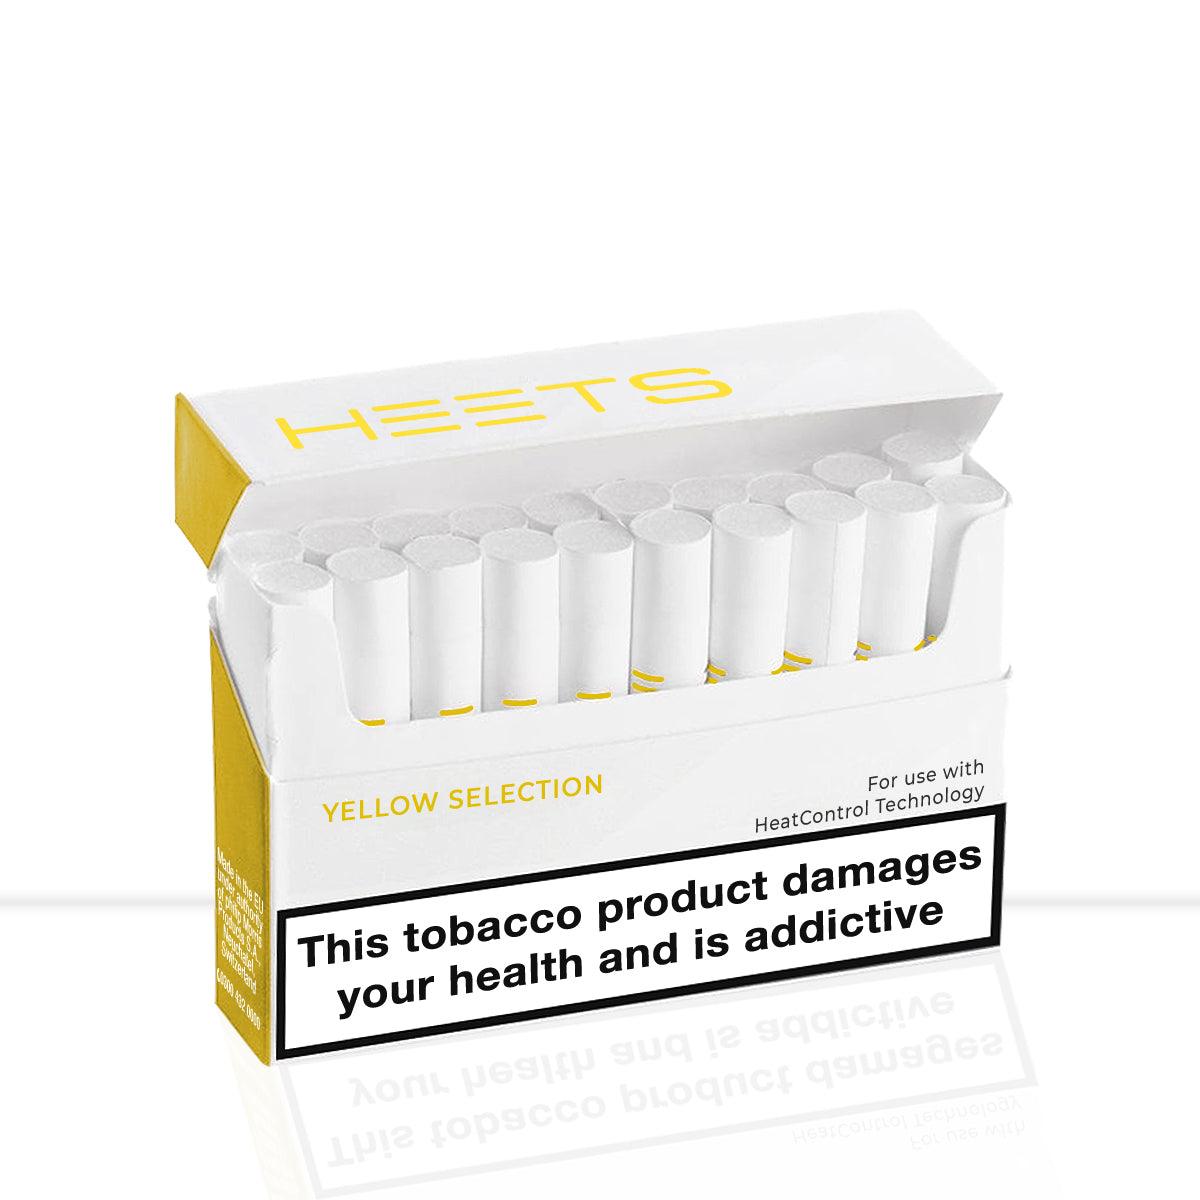 Yellow Heets IQOS - Heated Tobacco